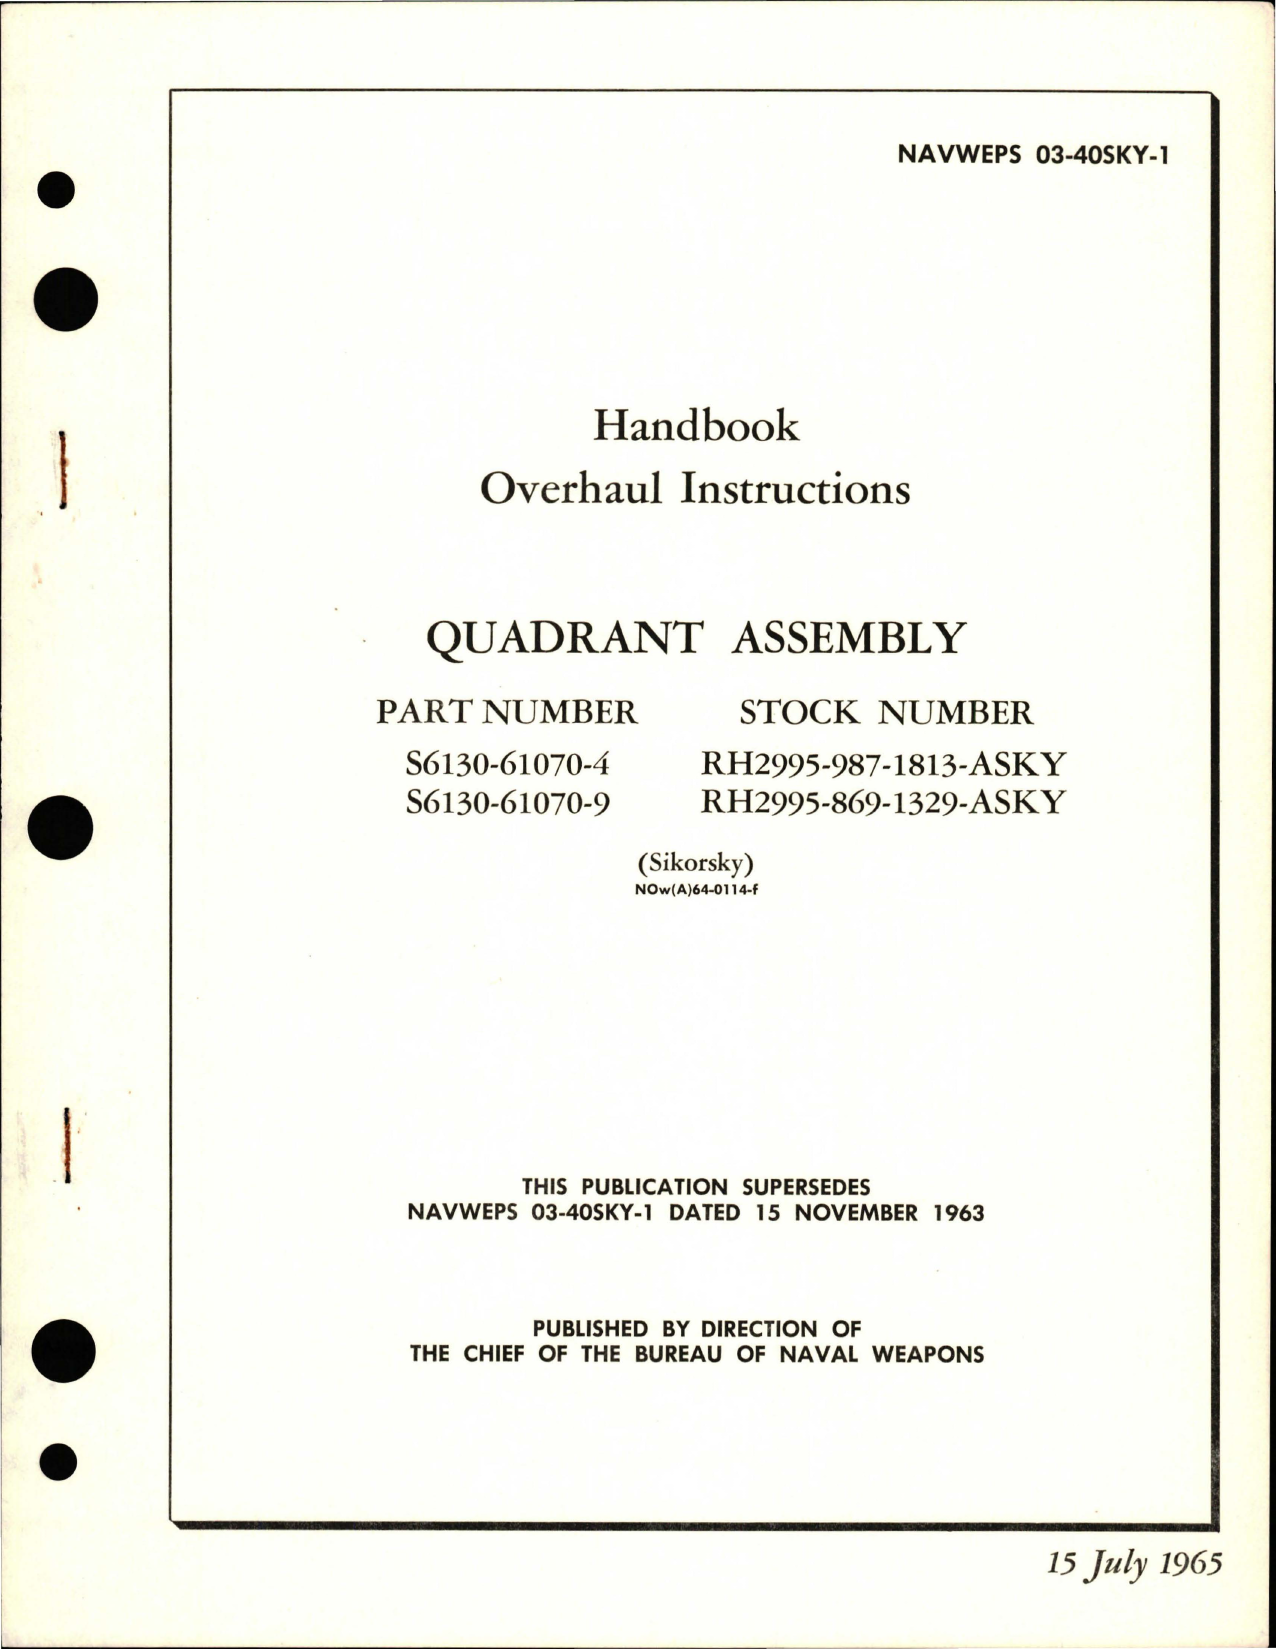 Sample page 1 from AirCorps Library document: Overhaul Instructions for Quadrant Assembly - Parts S6130-61070-4 and S6130-61070-9 